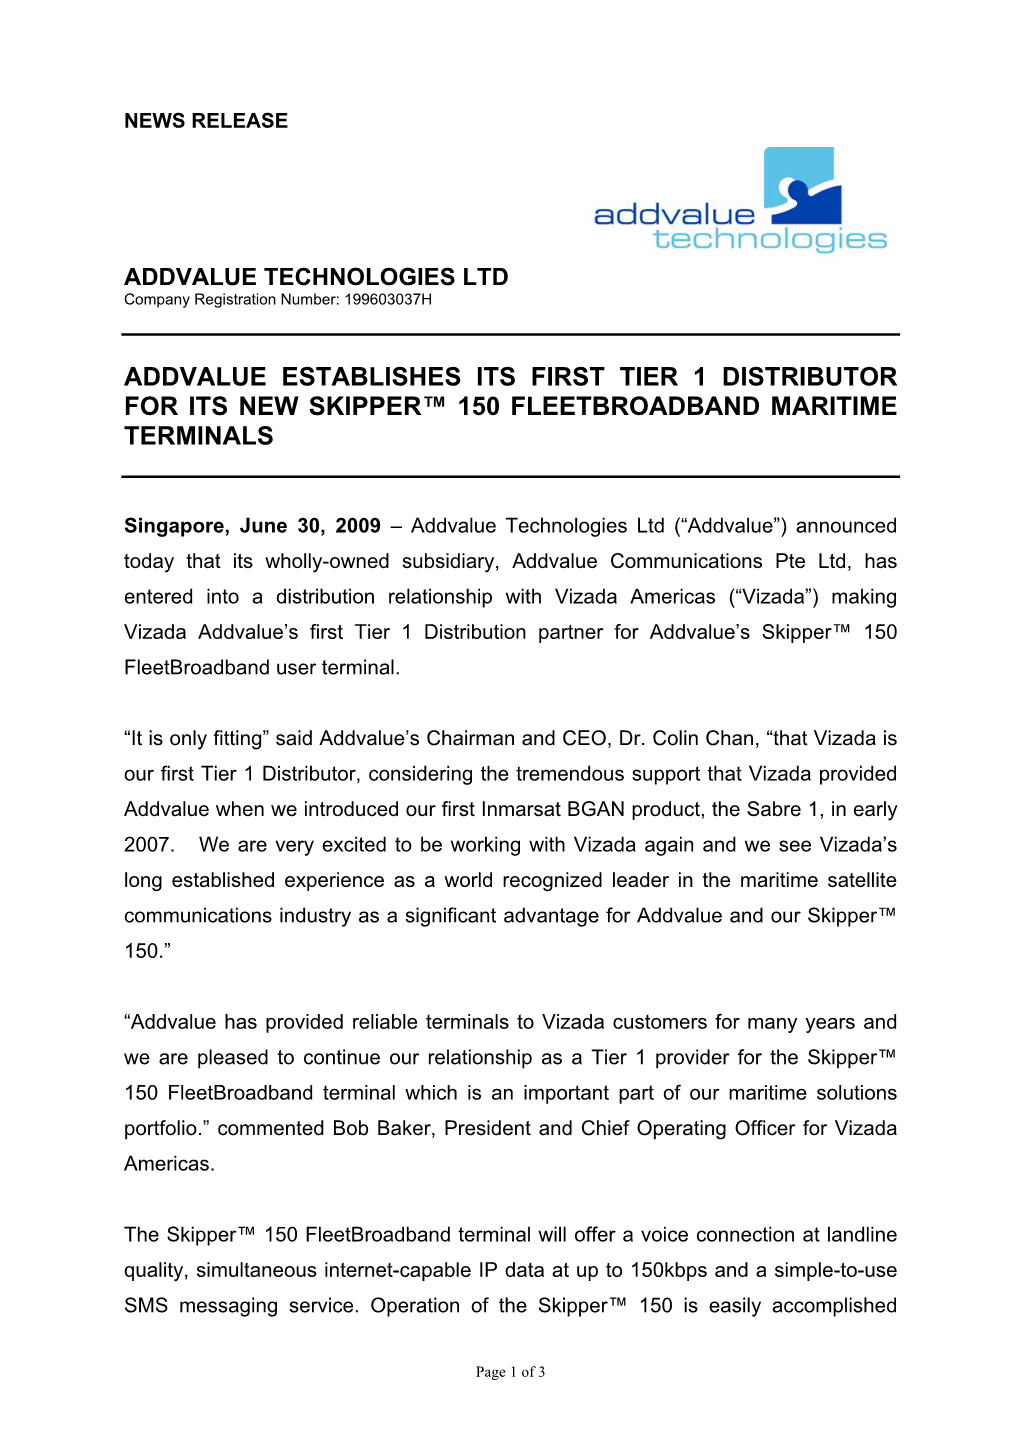 Addvalue Establishes Its First Tier 1 Distributor for Its New Skipper™ 150 Fleetbroadband Maritime Terminals